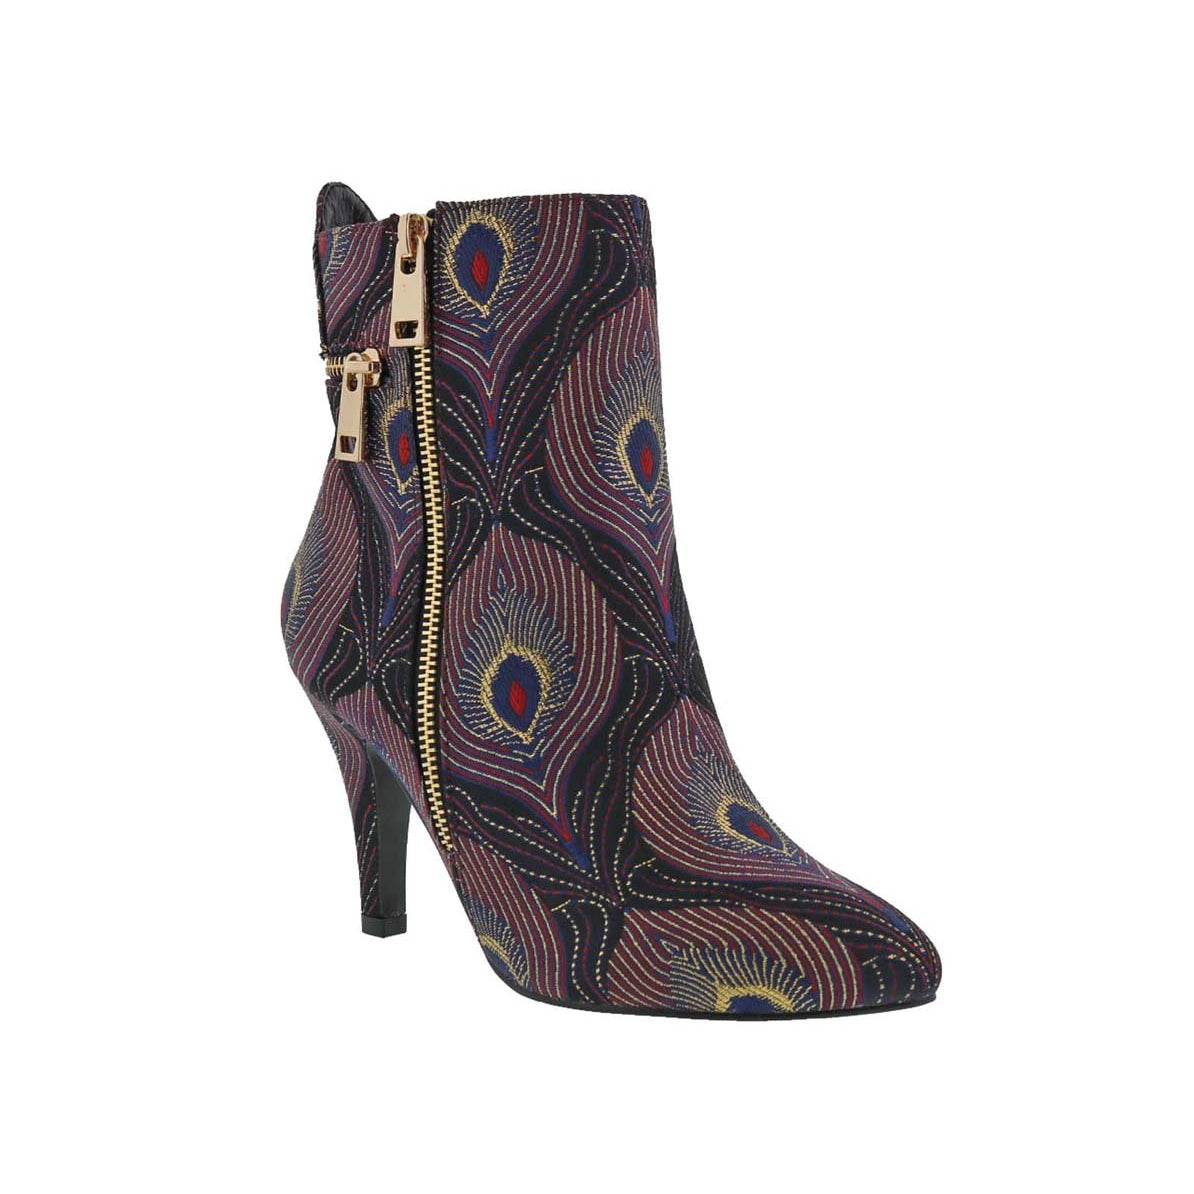 BELLINI CLAUDETTE WOMEN DRESSY ANKLE BOOT IN WINE GOLD COMBO - TLW Shoes